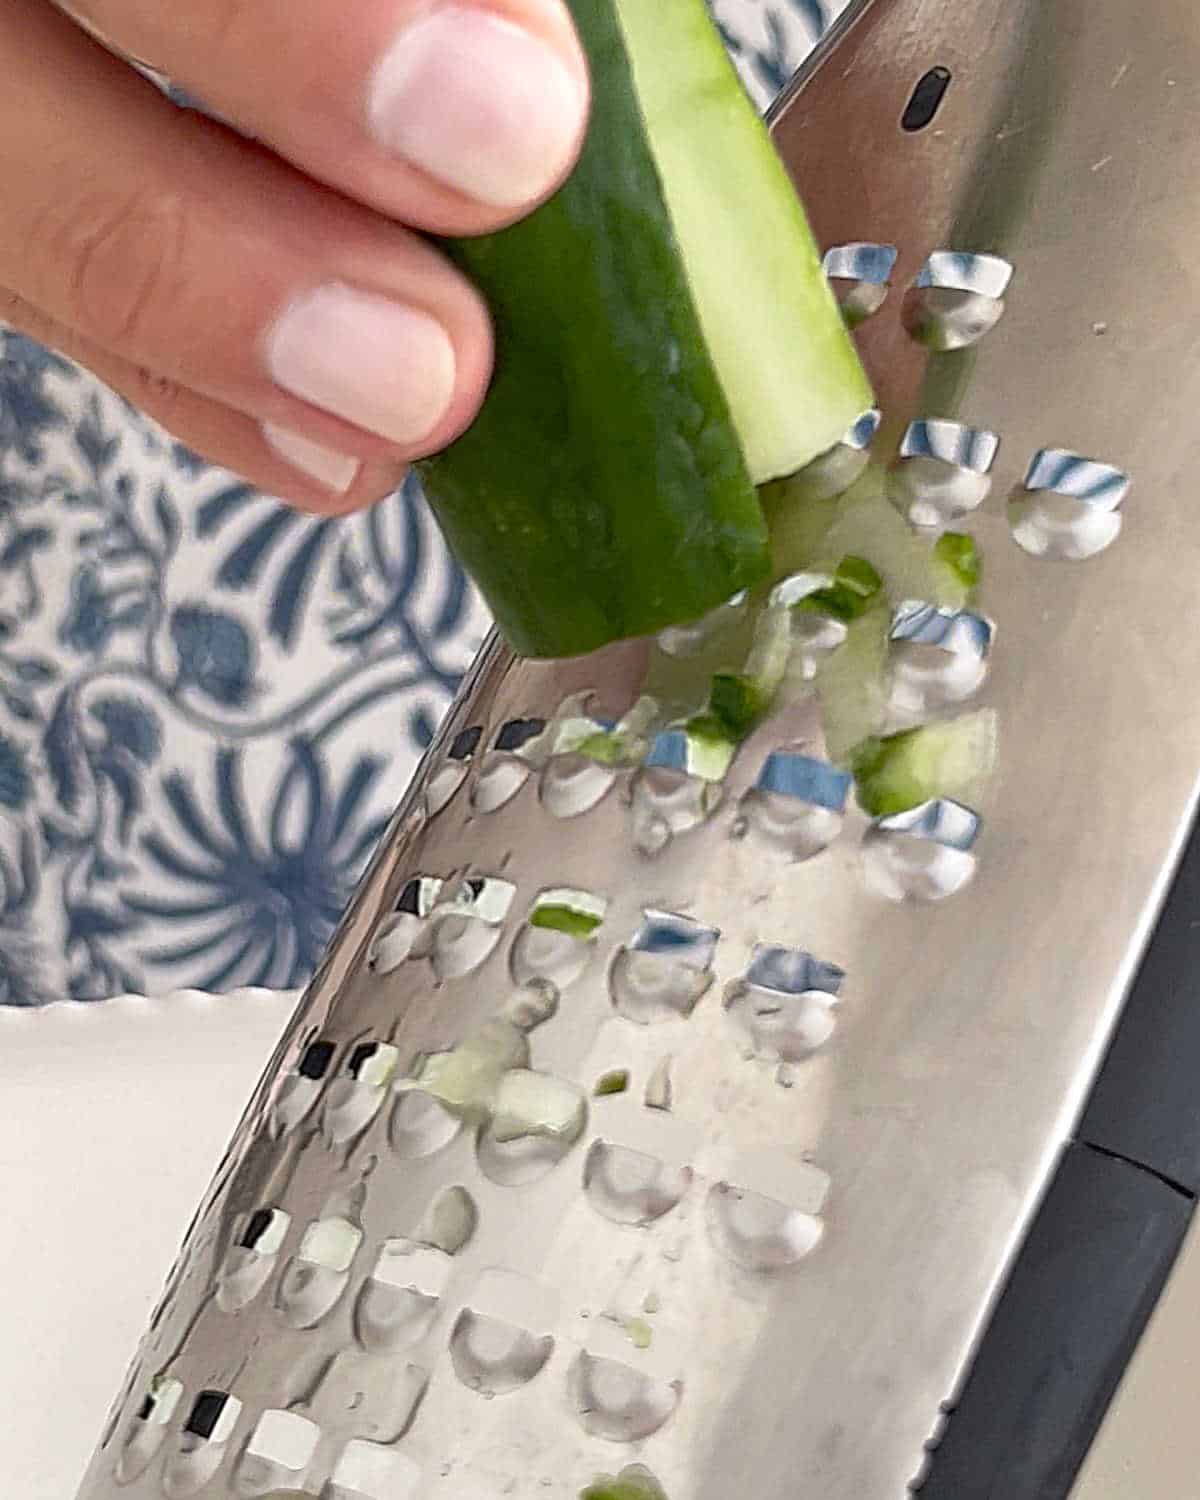 Grating cucumbers with a coarse or large holed grater.